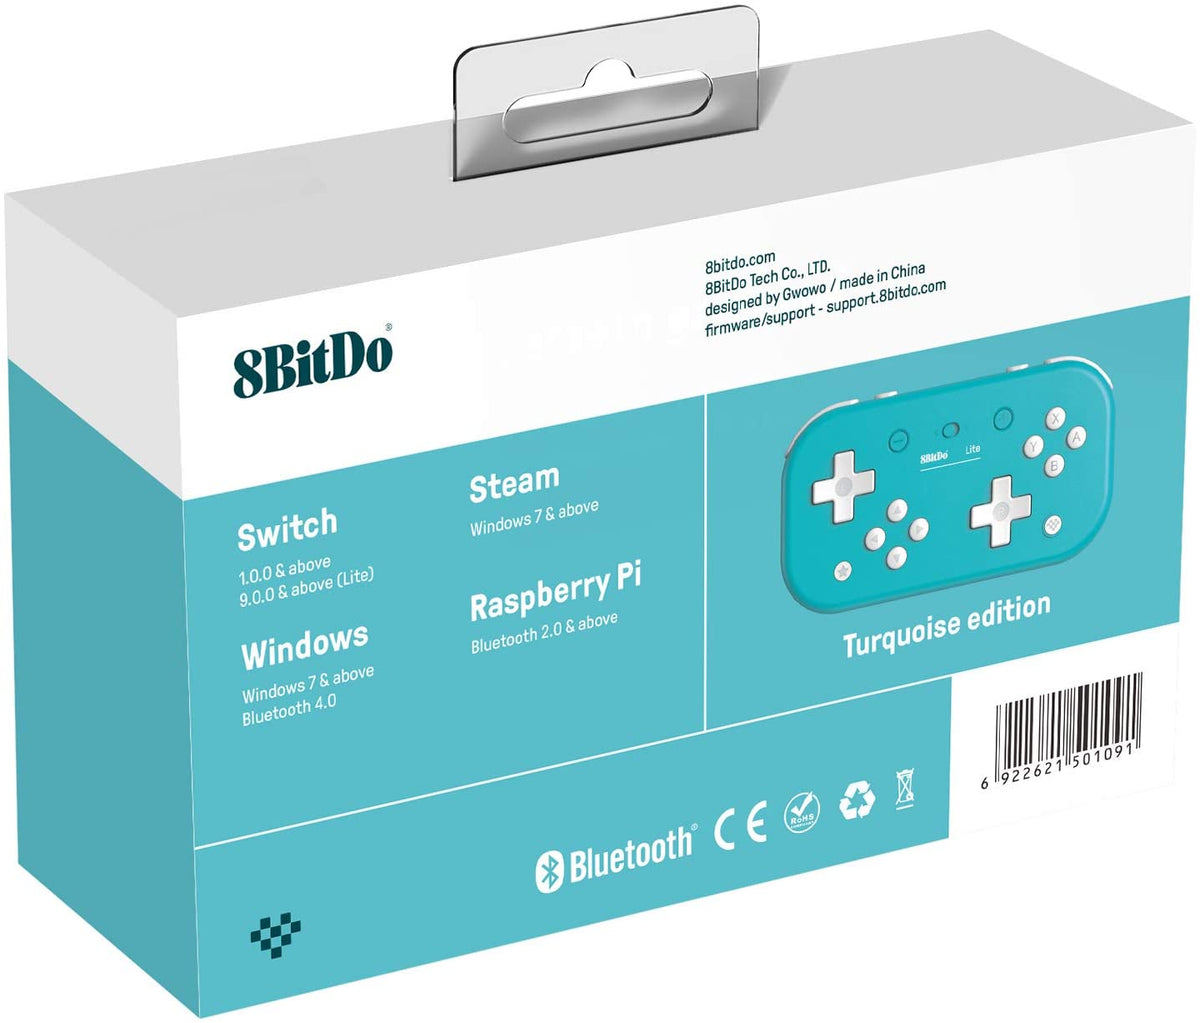 8BitDo Lite bluetooth controller Turquoise Gamesellers.nl